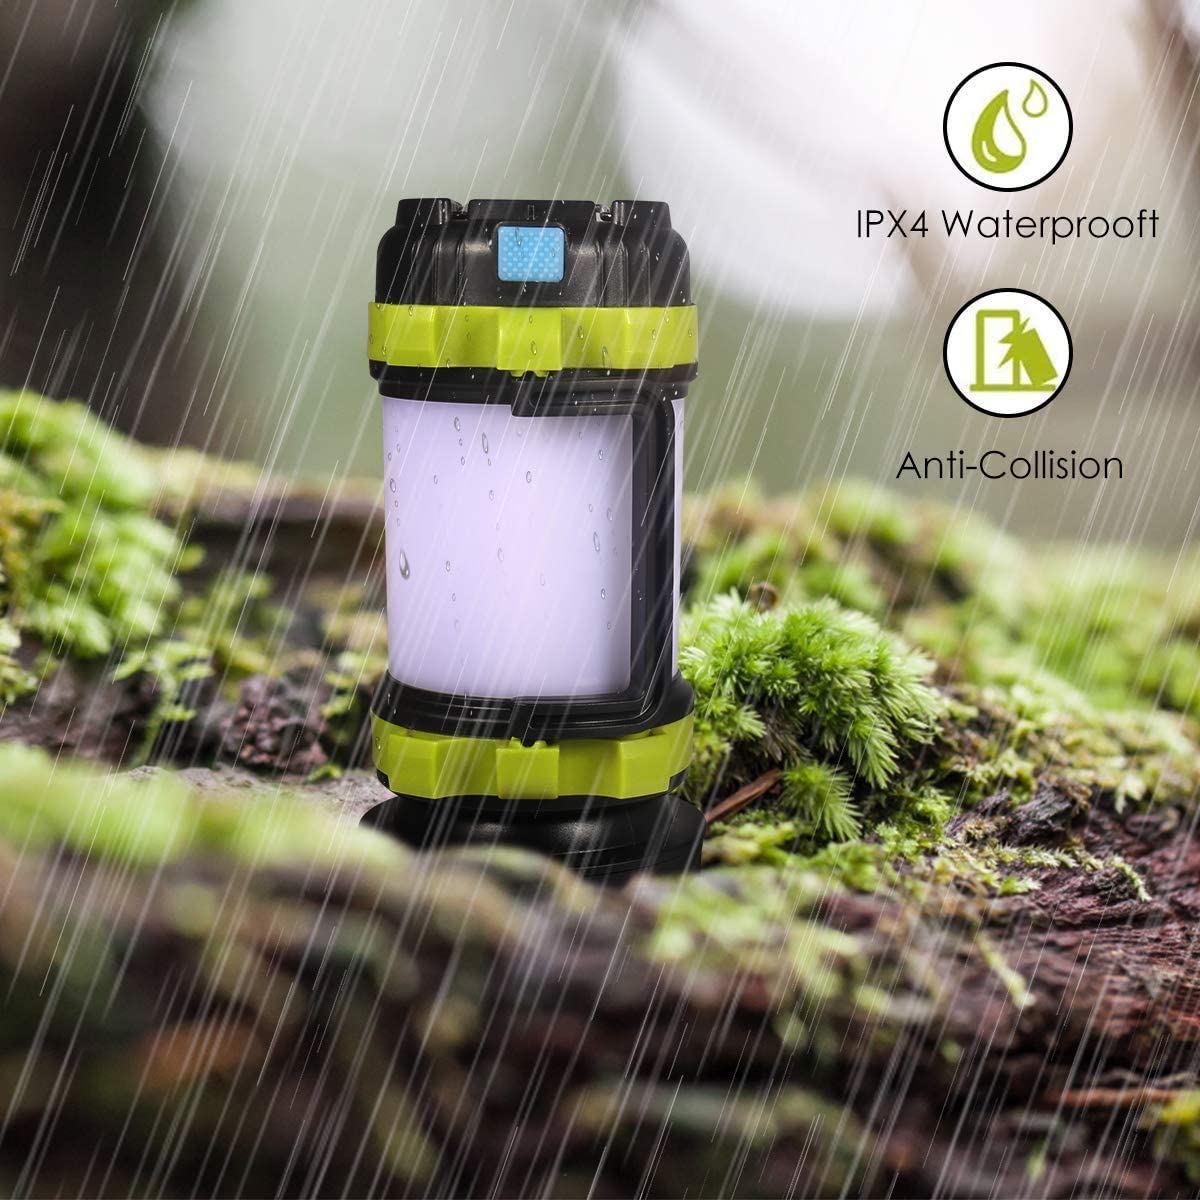 Lighting EVER 1000LM Battery Powered LED Camping Lantern, Waterproof T –  USA Camp Gear